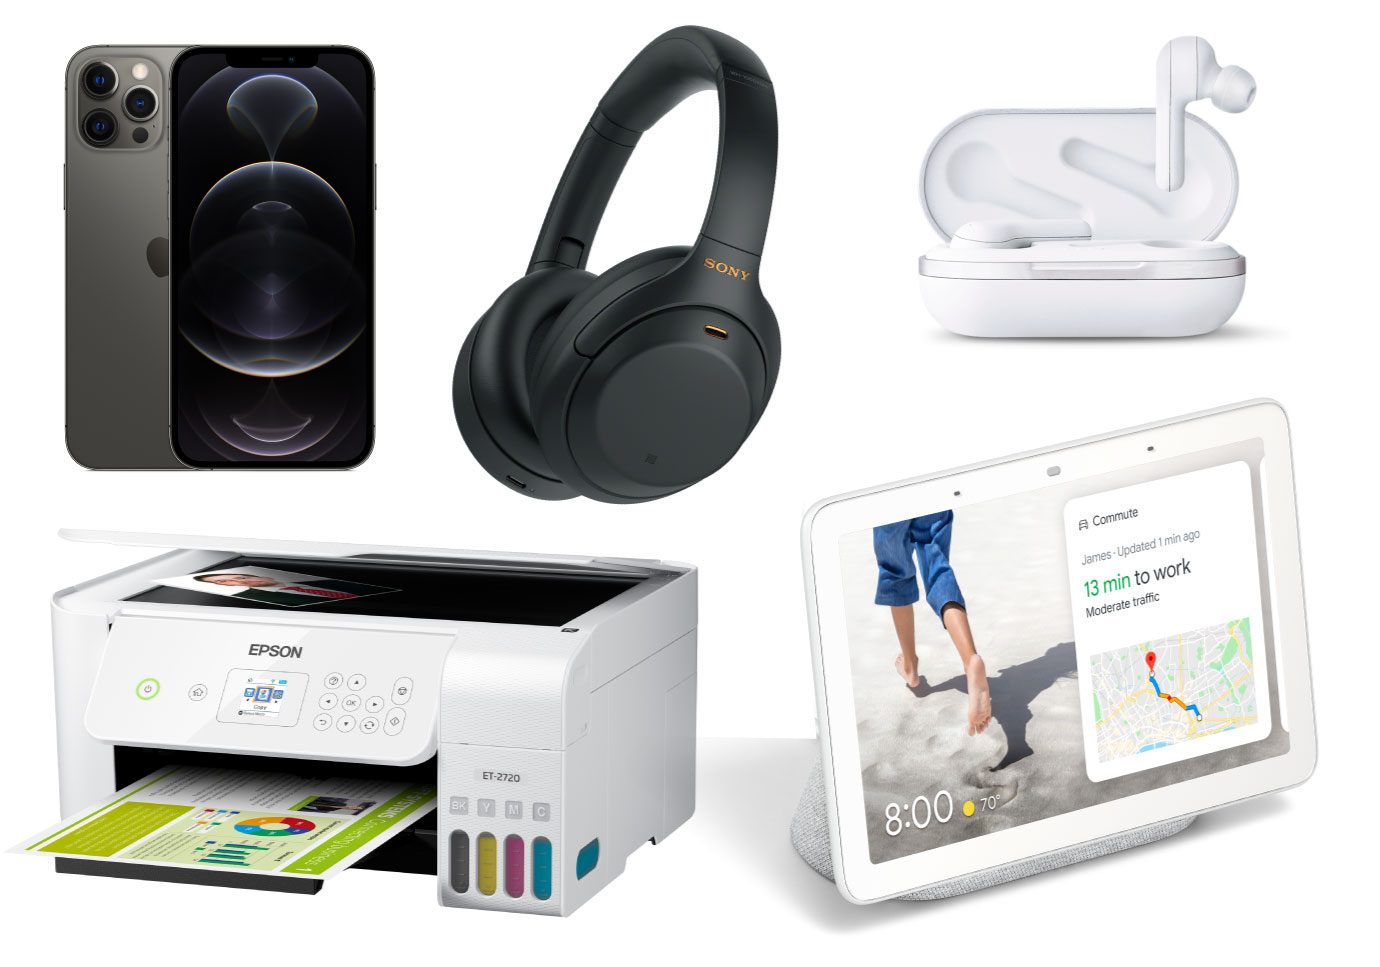 Each of the home office products listed below are shown against a white background.